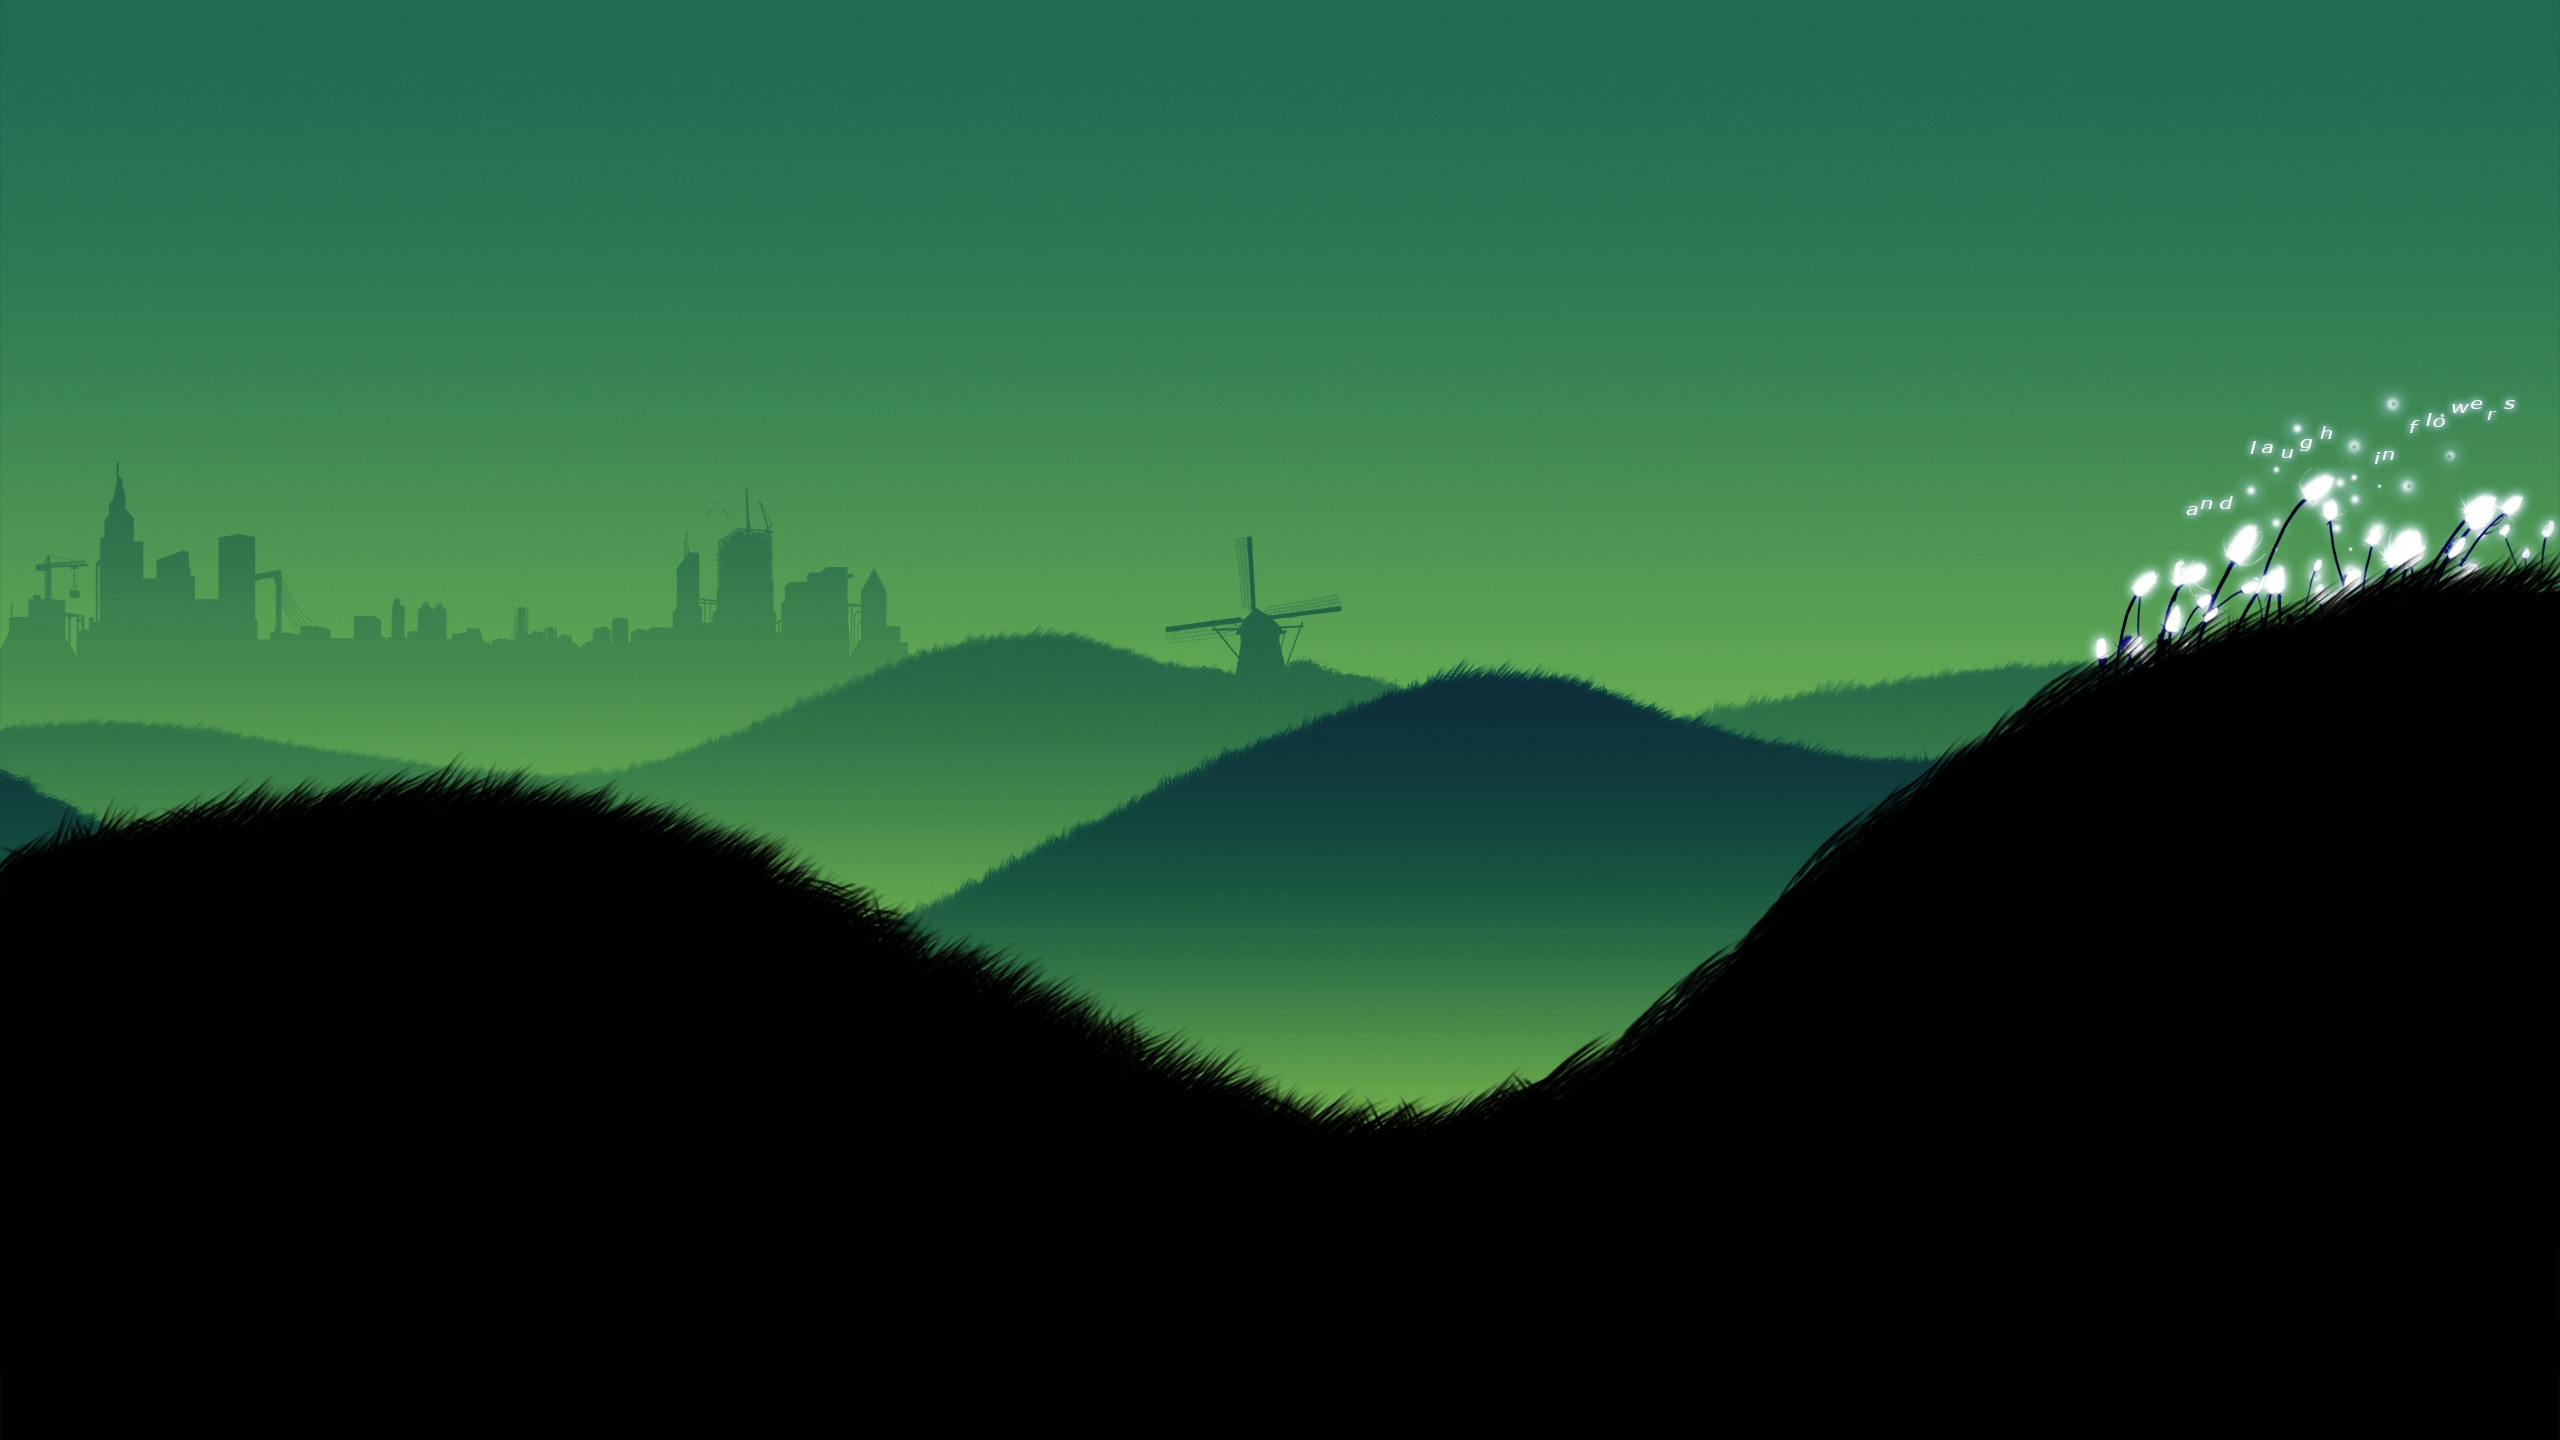 Silhouette of Mountain During Daytime. Wallpaper in 2560x1440 Resolution